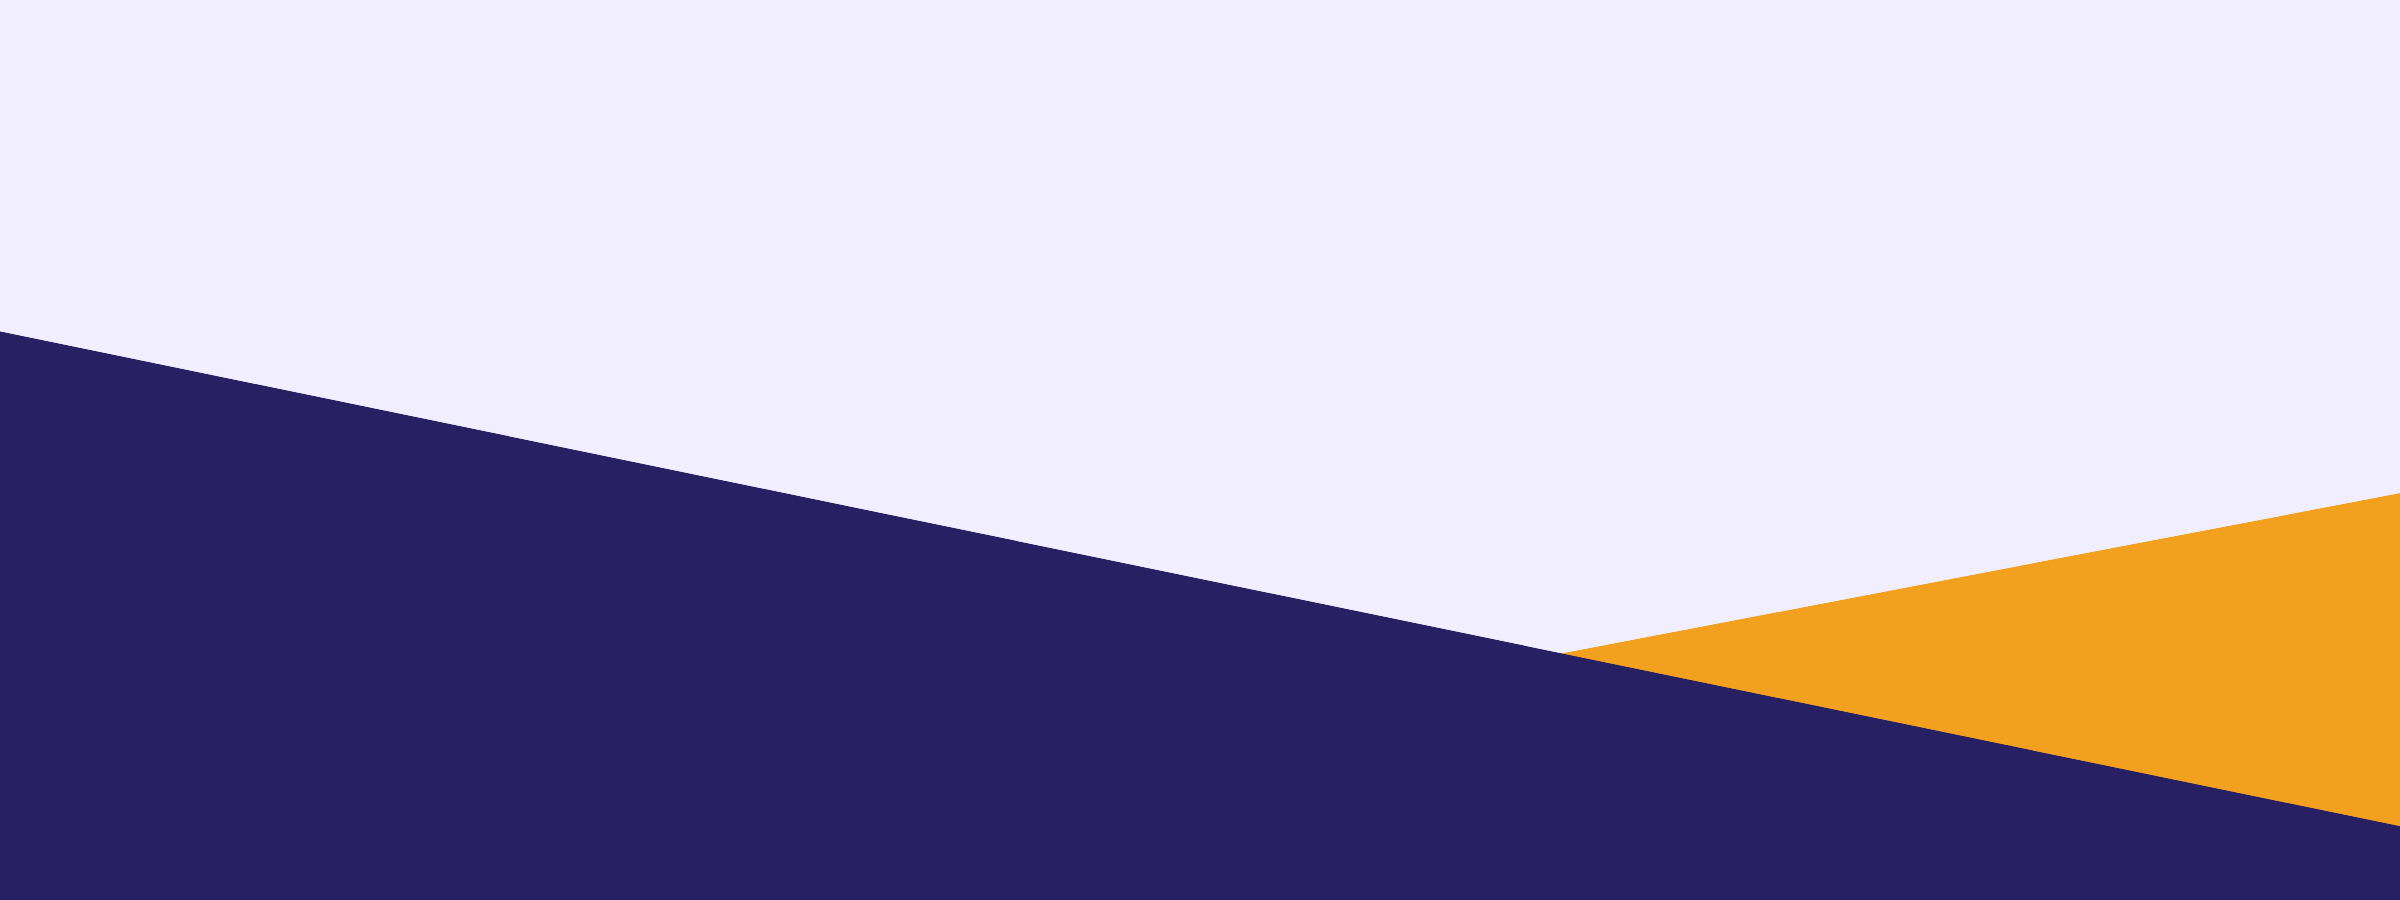 Light purple background with overlapping dark purple and yellow rectangles.